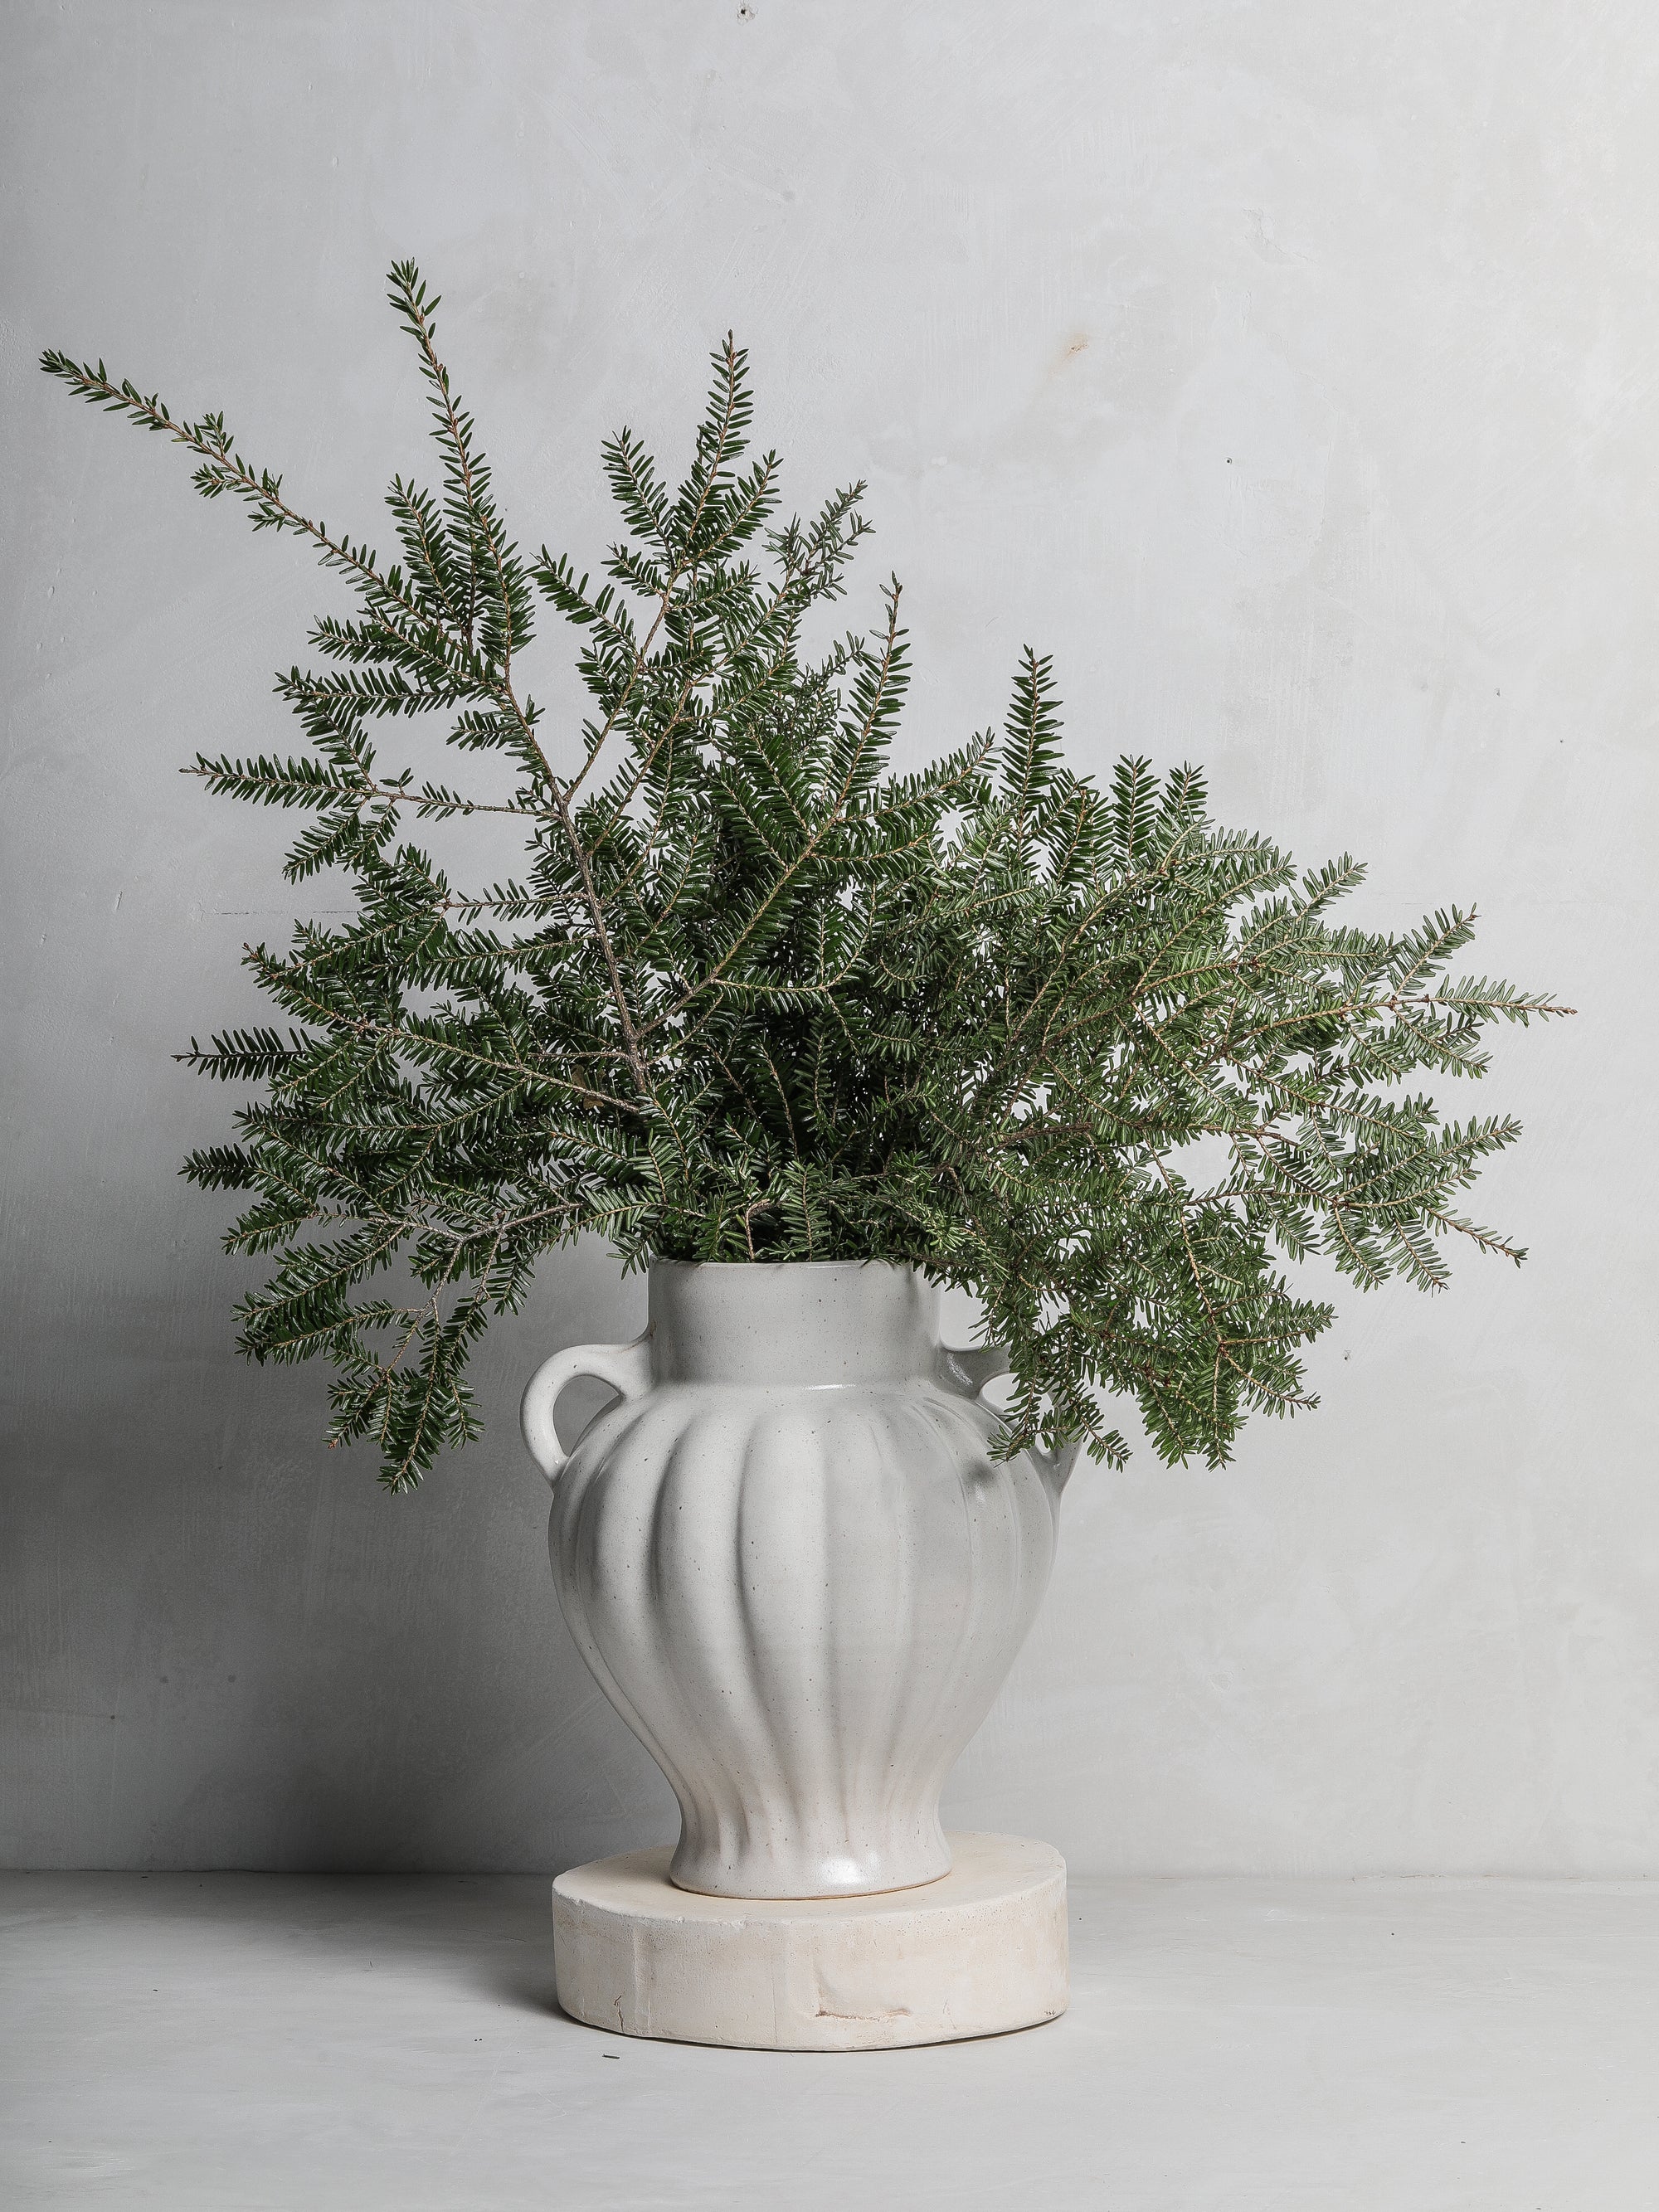 French Scalloped Vase II in Lunaria